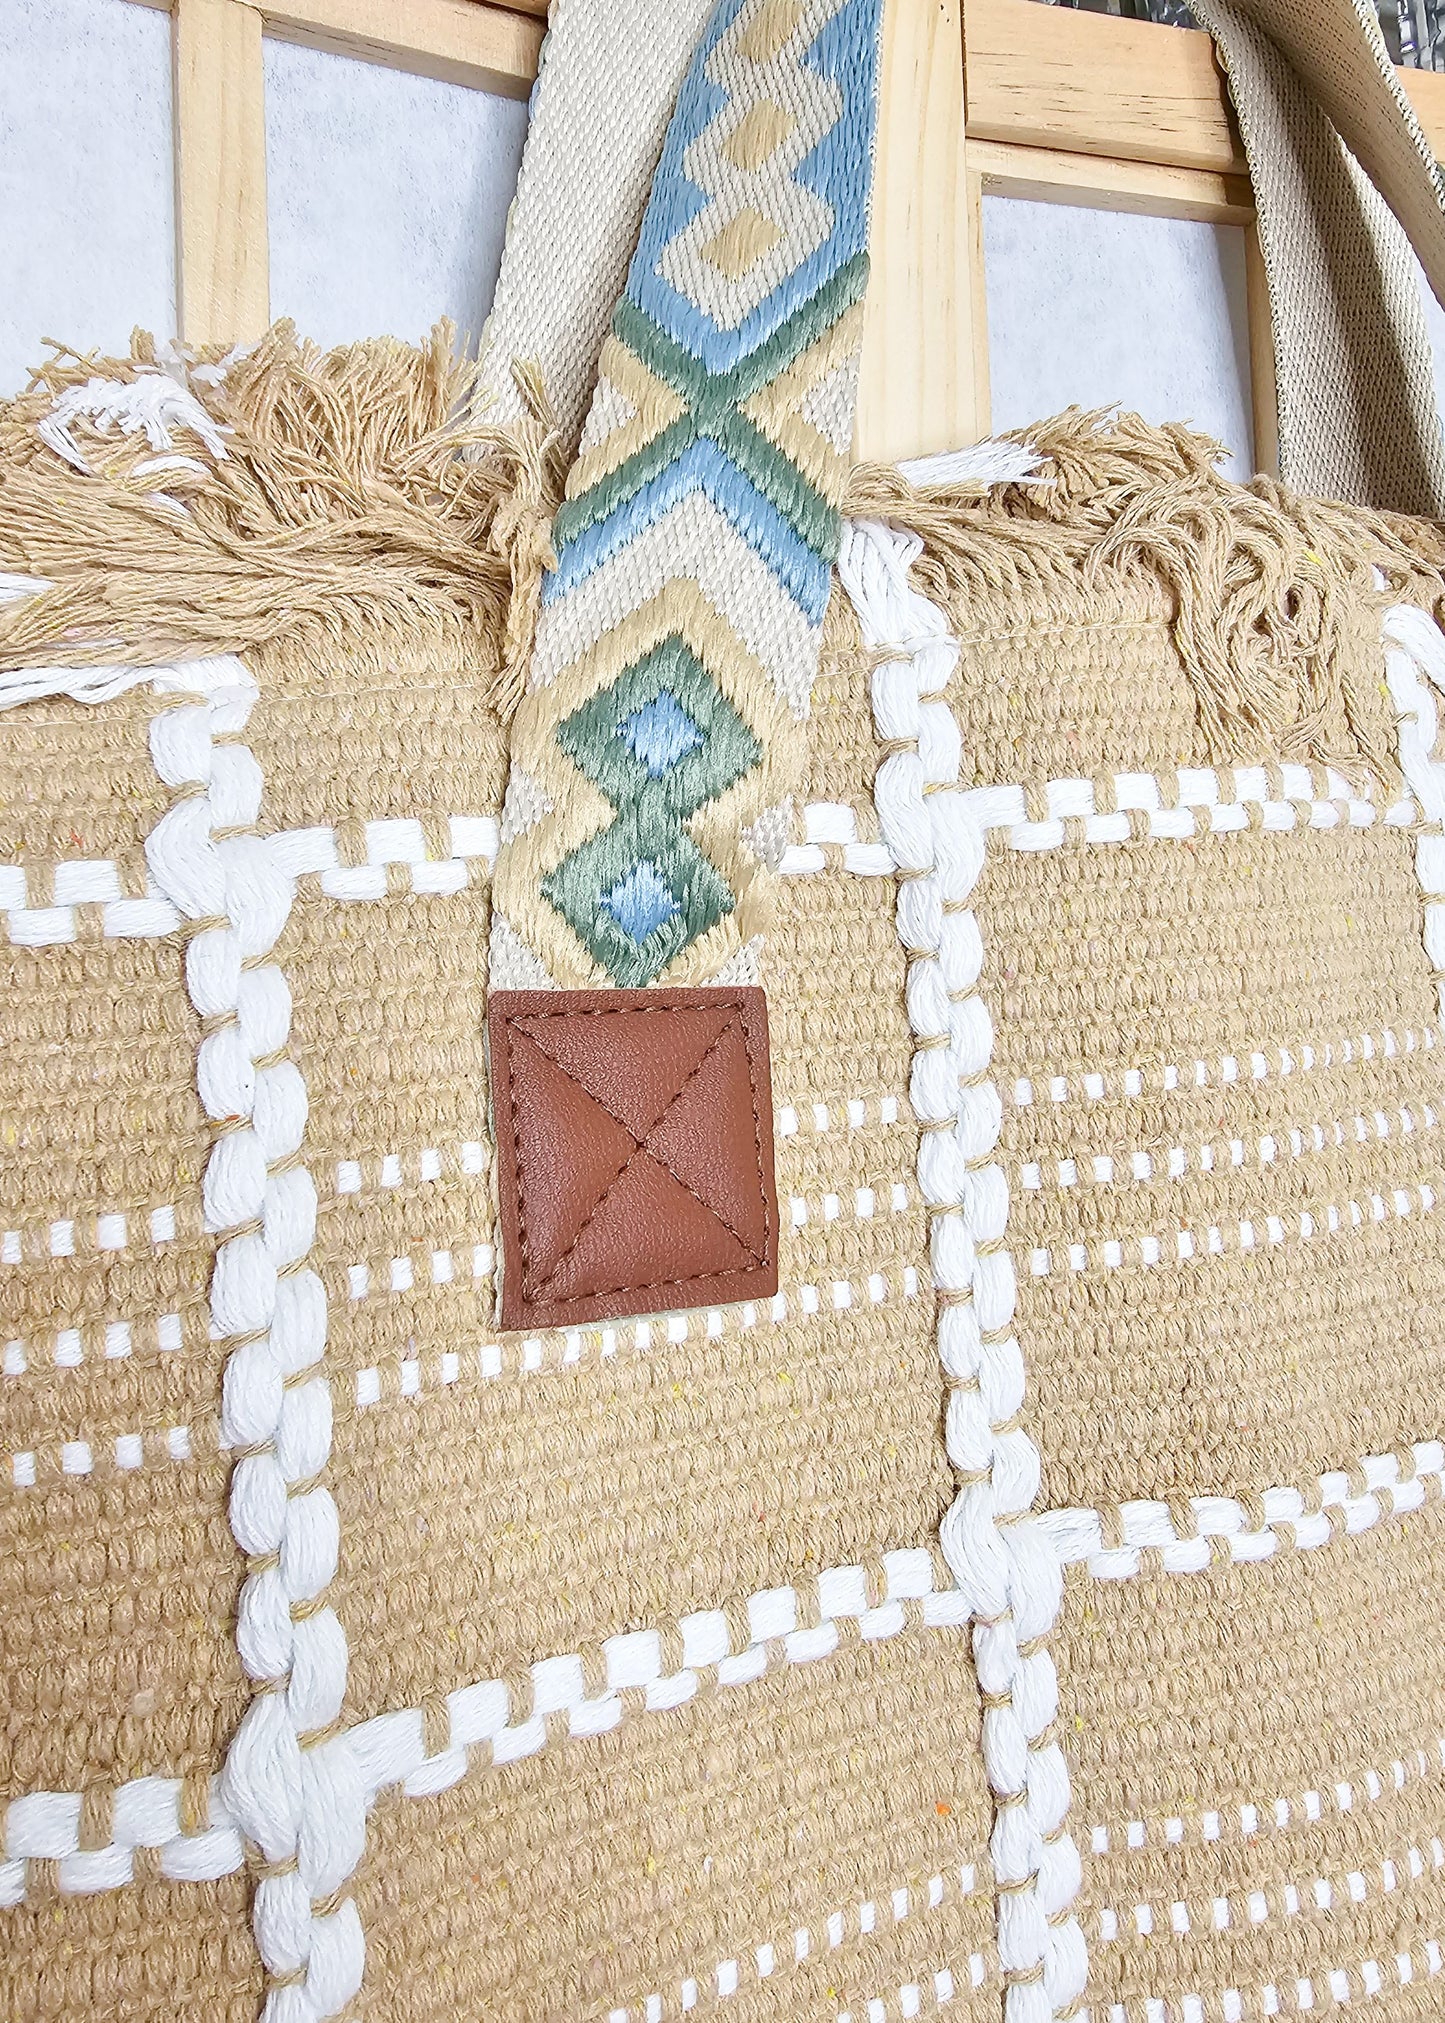 Cotton Bag with Embroidered Straps- Tan